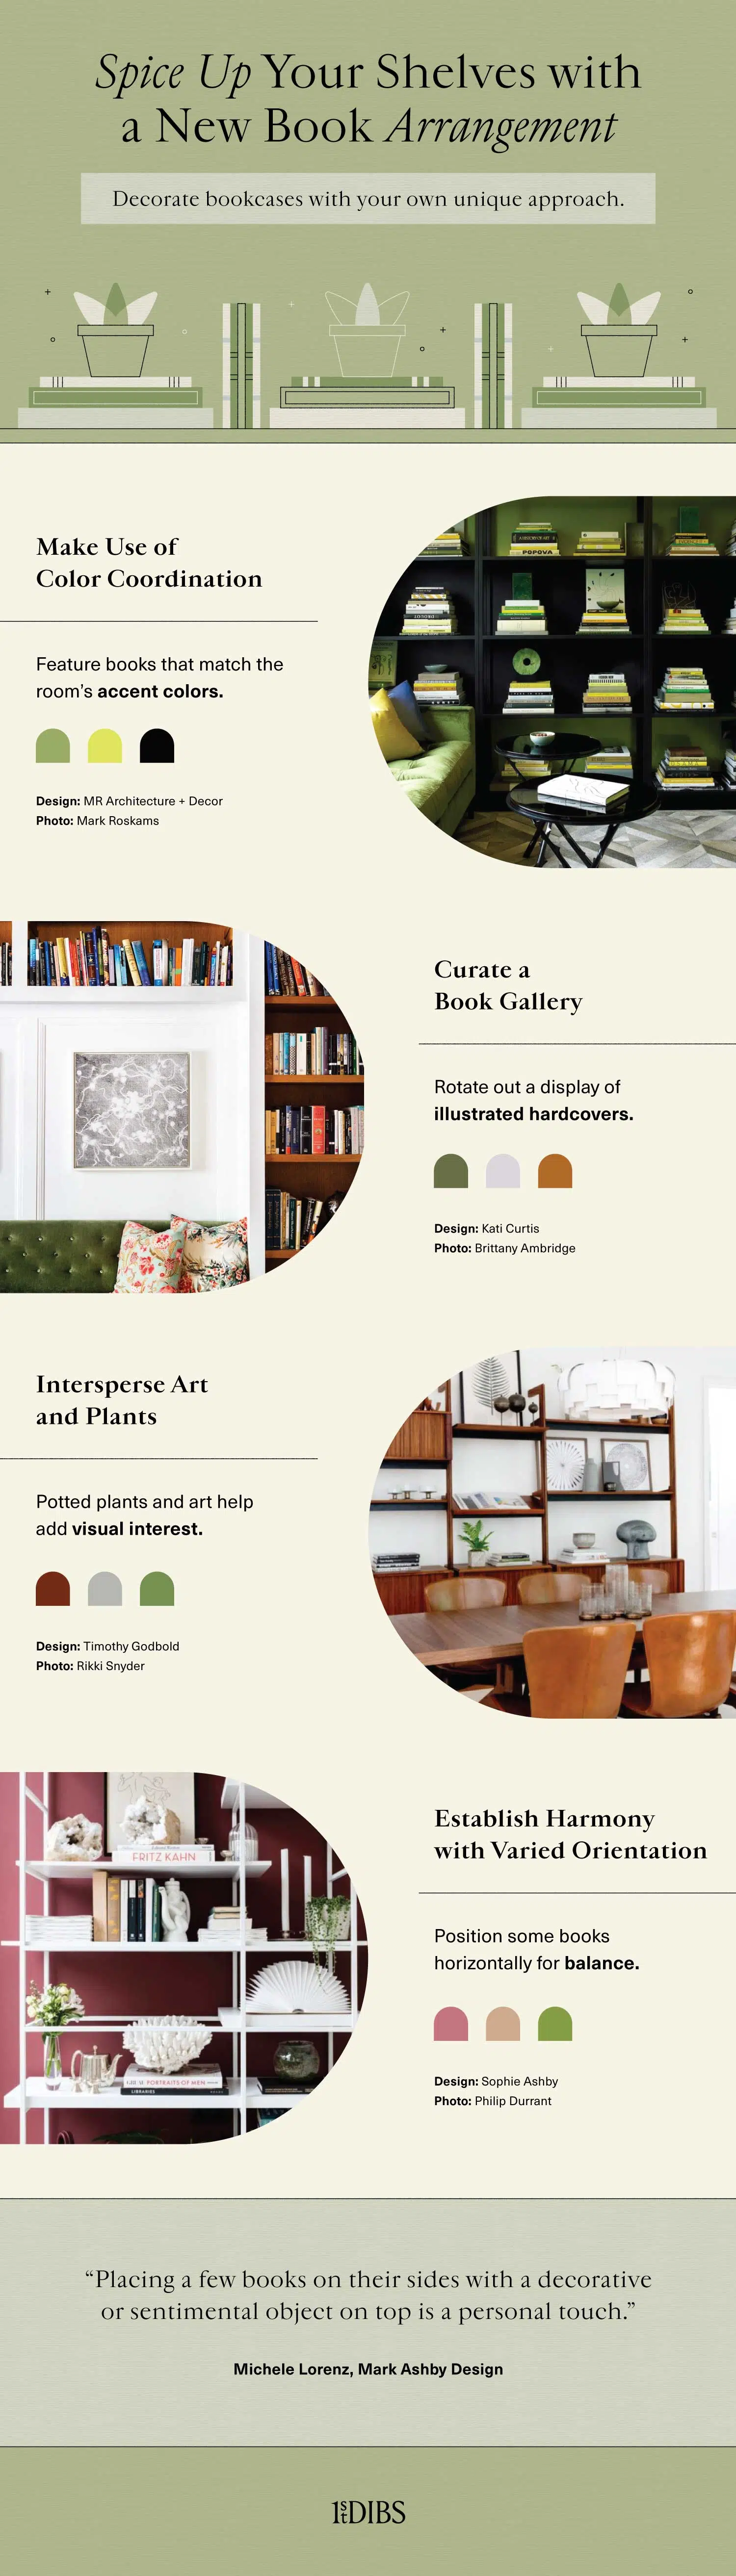 Illustrations and photos that show how spicing up your bookcases can help when it comes to decorating with books — color coordination, a book gallery, an integration of plants and more are tips that designers share for this kind of project